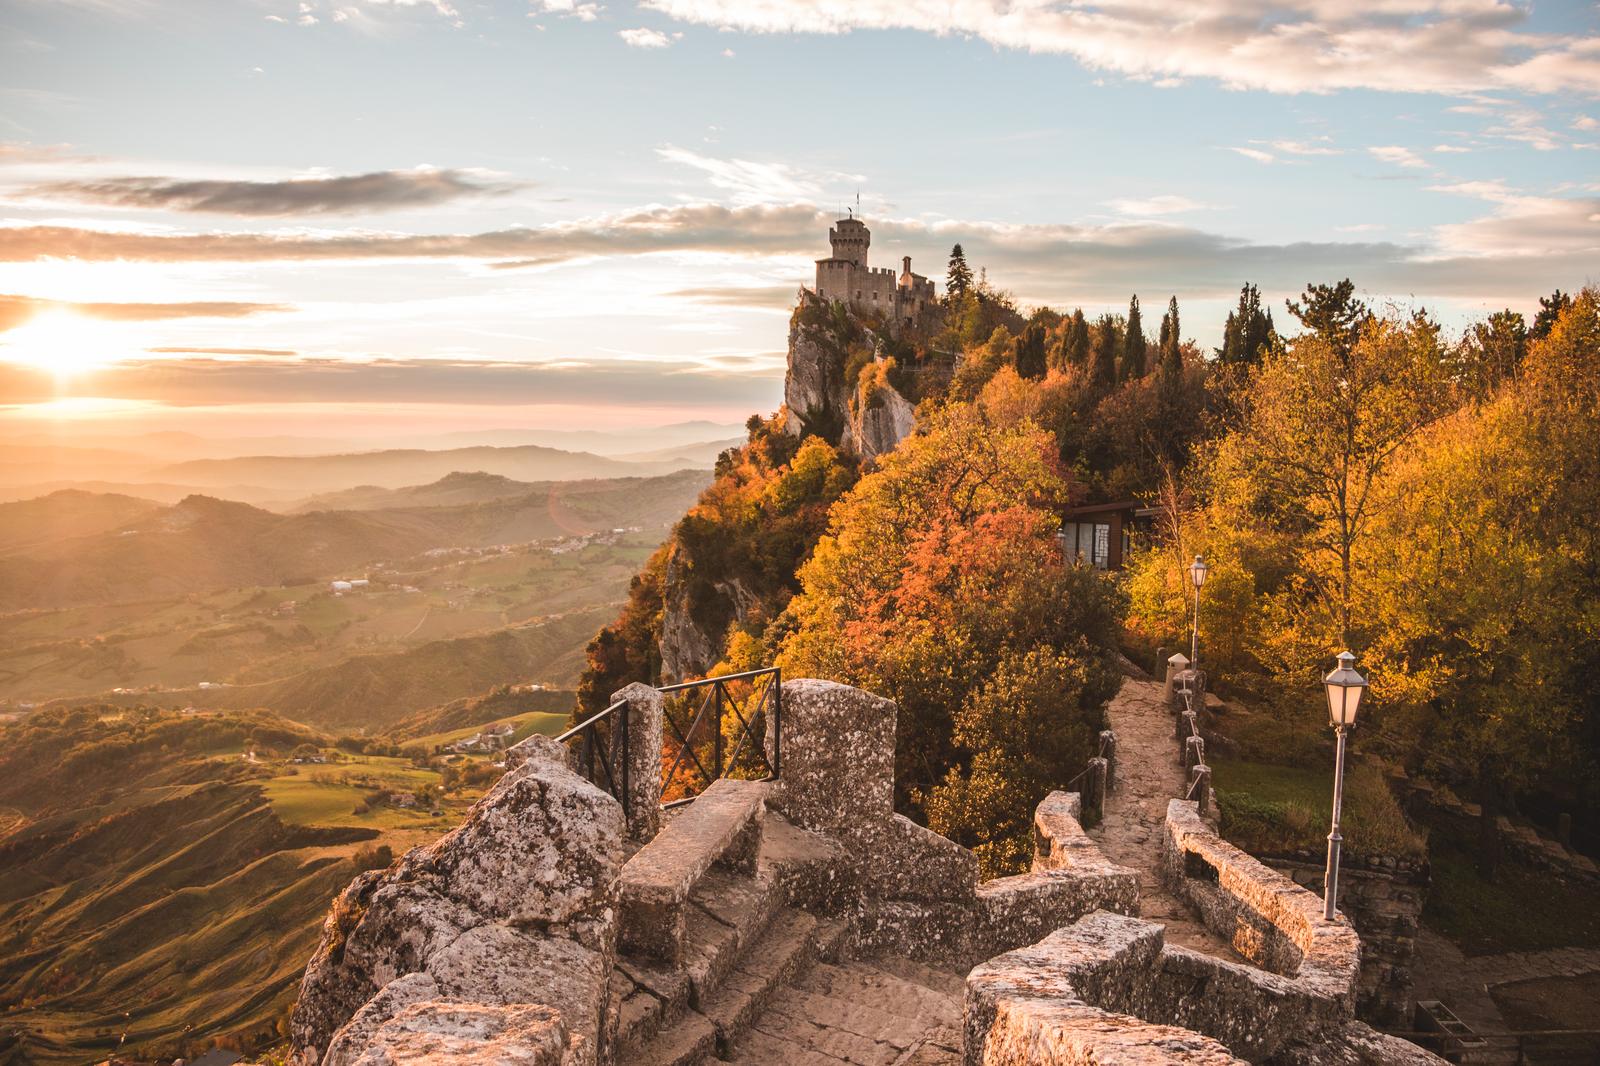 Can You Pass This 40-Question Geography Test That Gets Progressively Harder With Each Question? San Marino